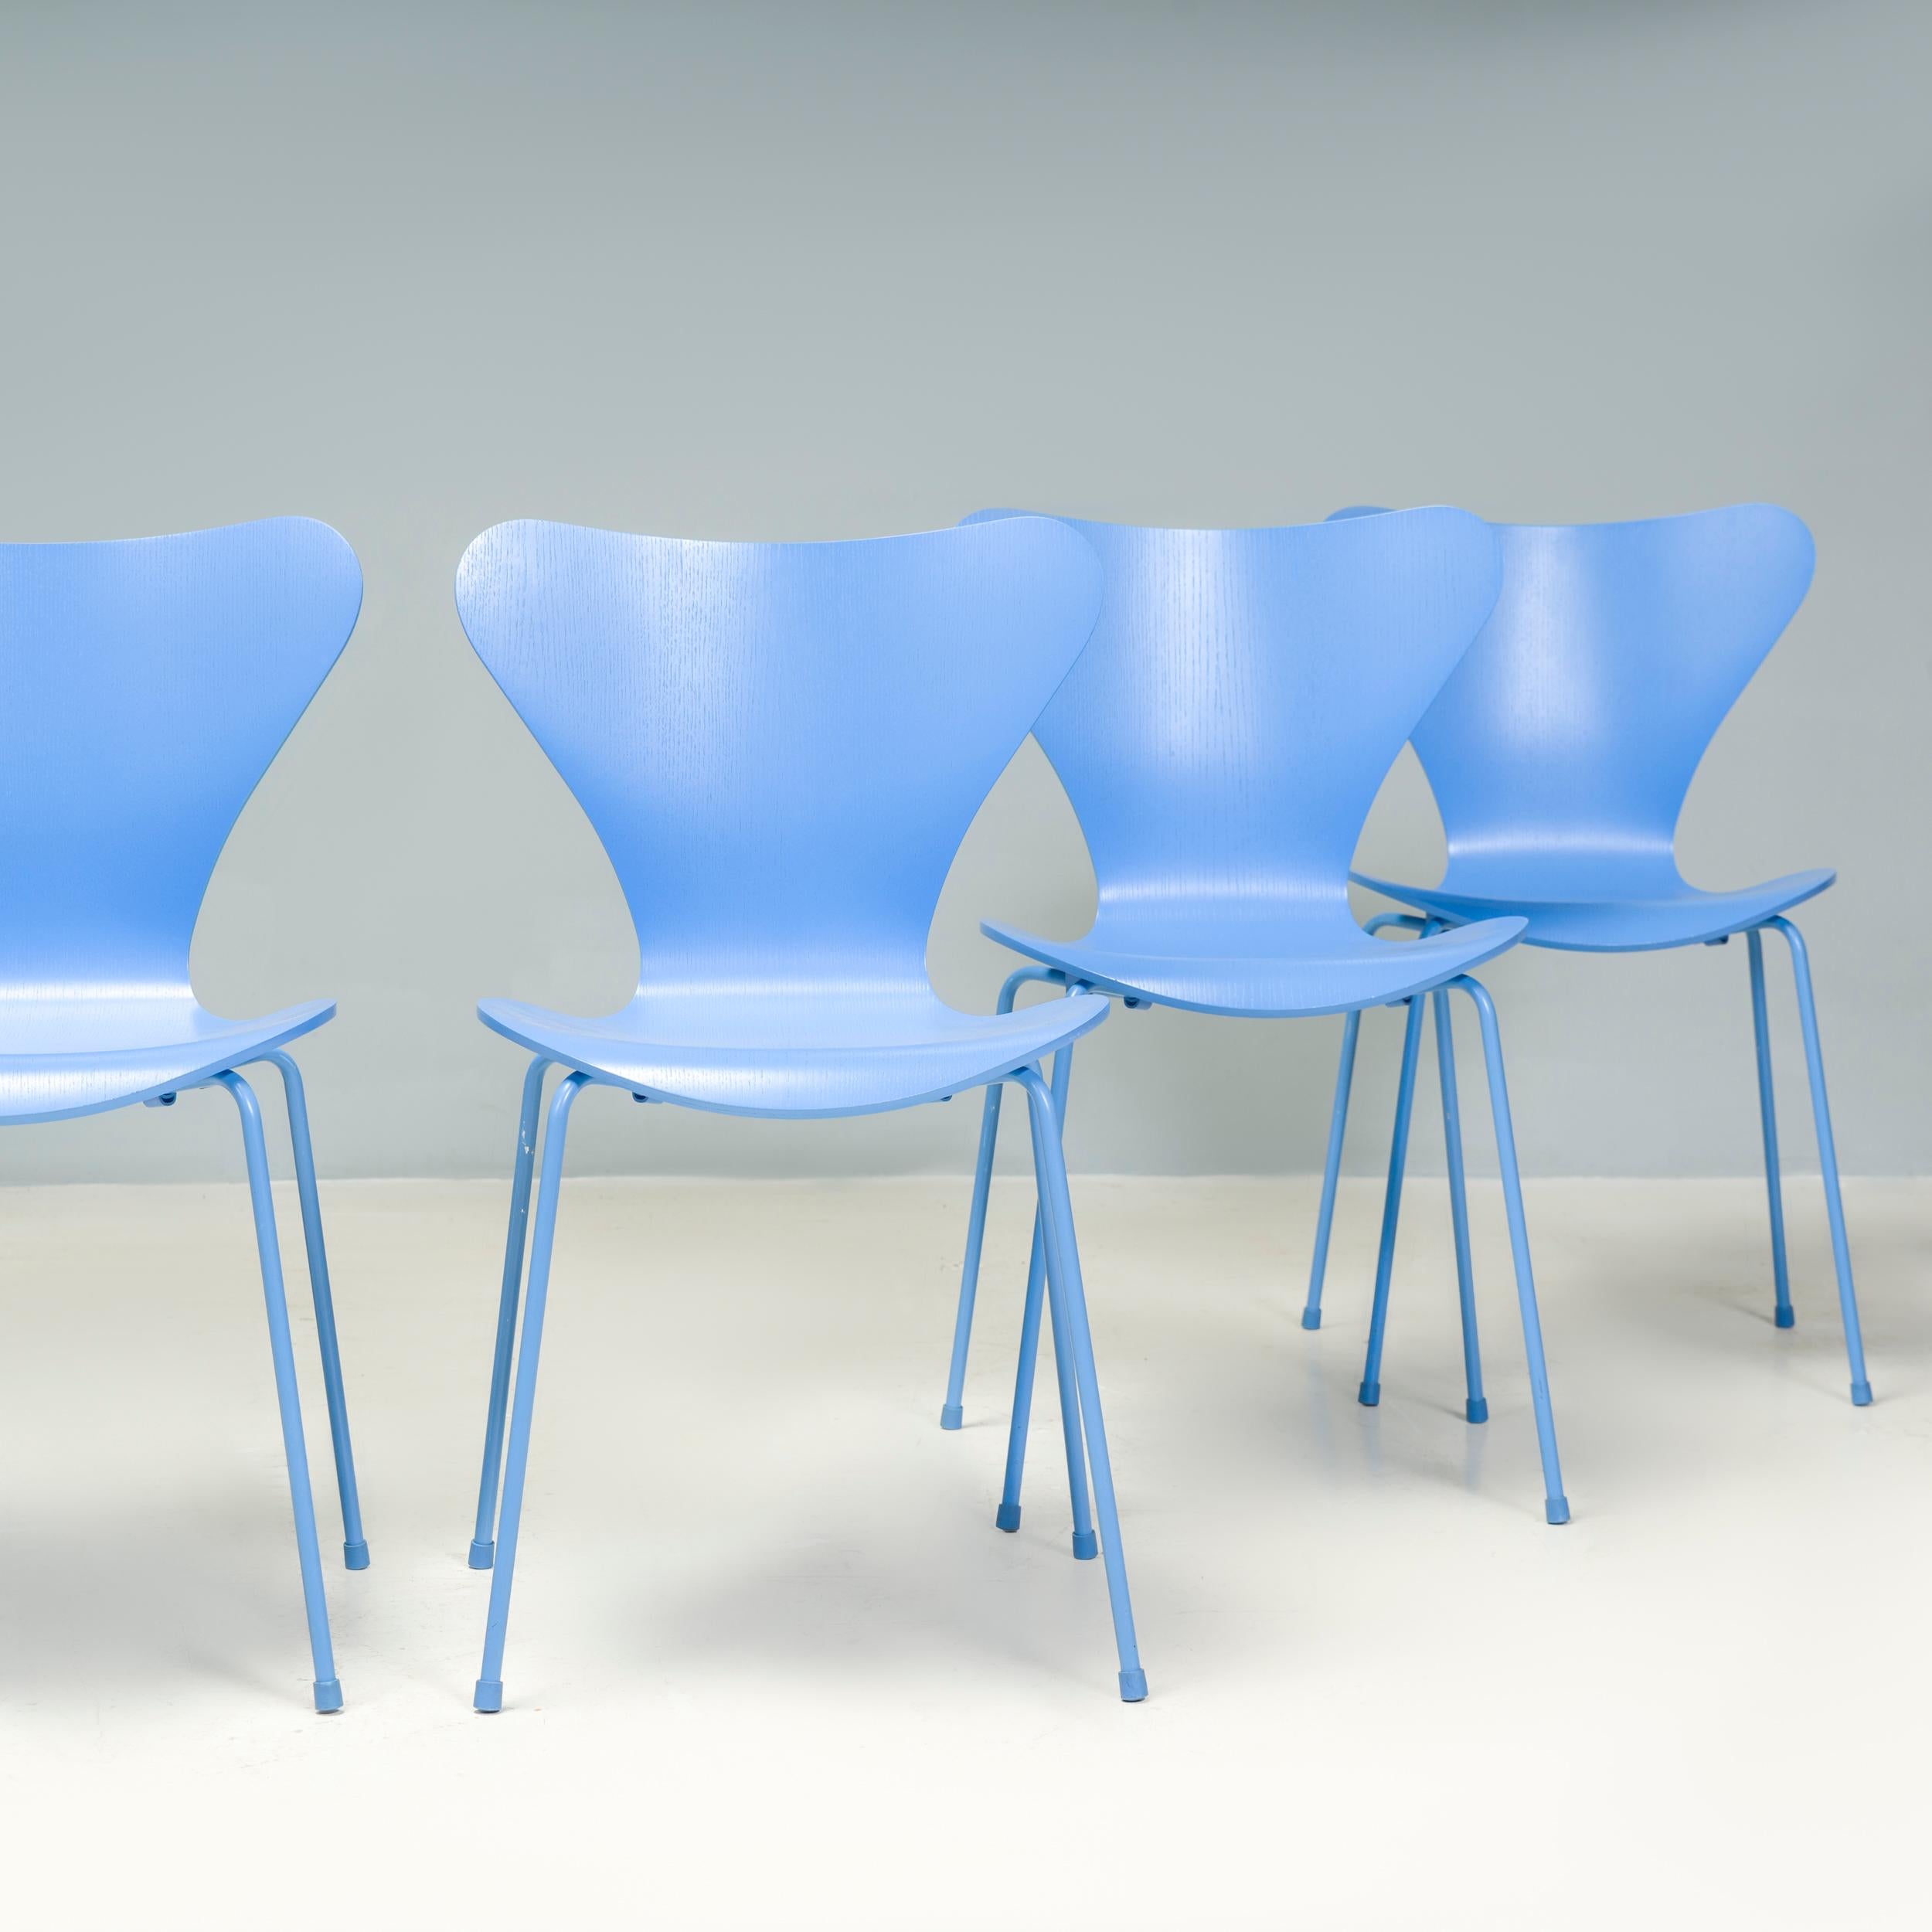  Fritz Hansen by Arne Jacobsen Monochrome Blue Series 7 Dining Chairs, Set of 6 In Good Condition For Sale In London, GB